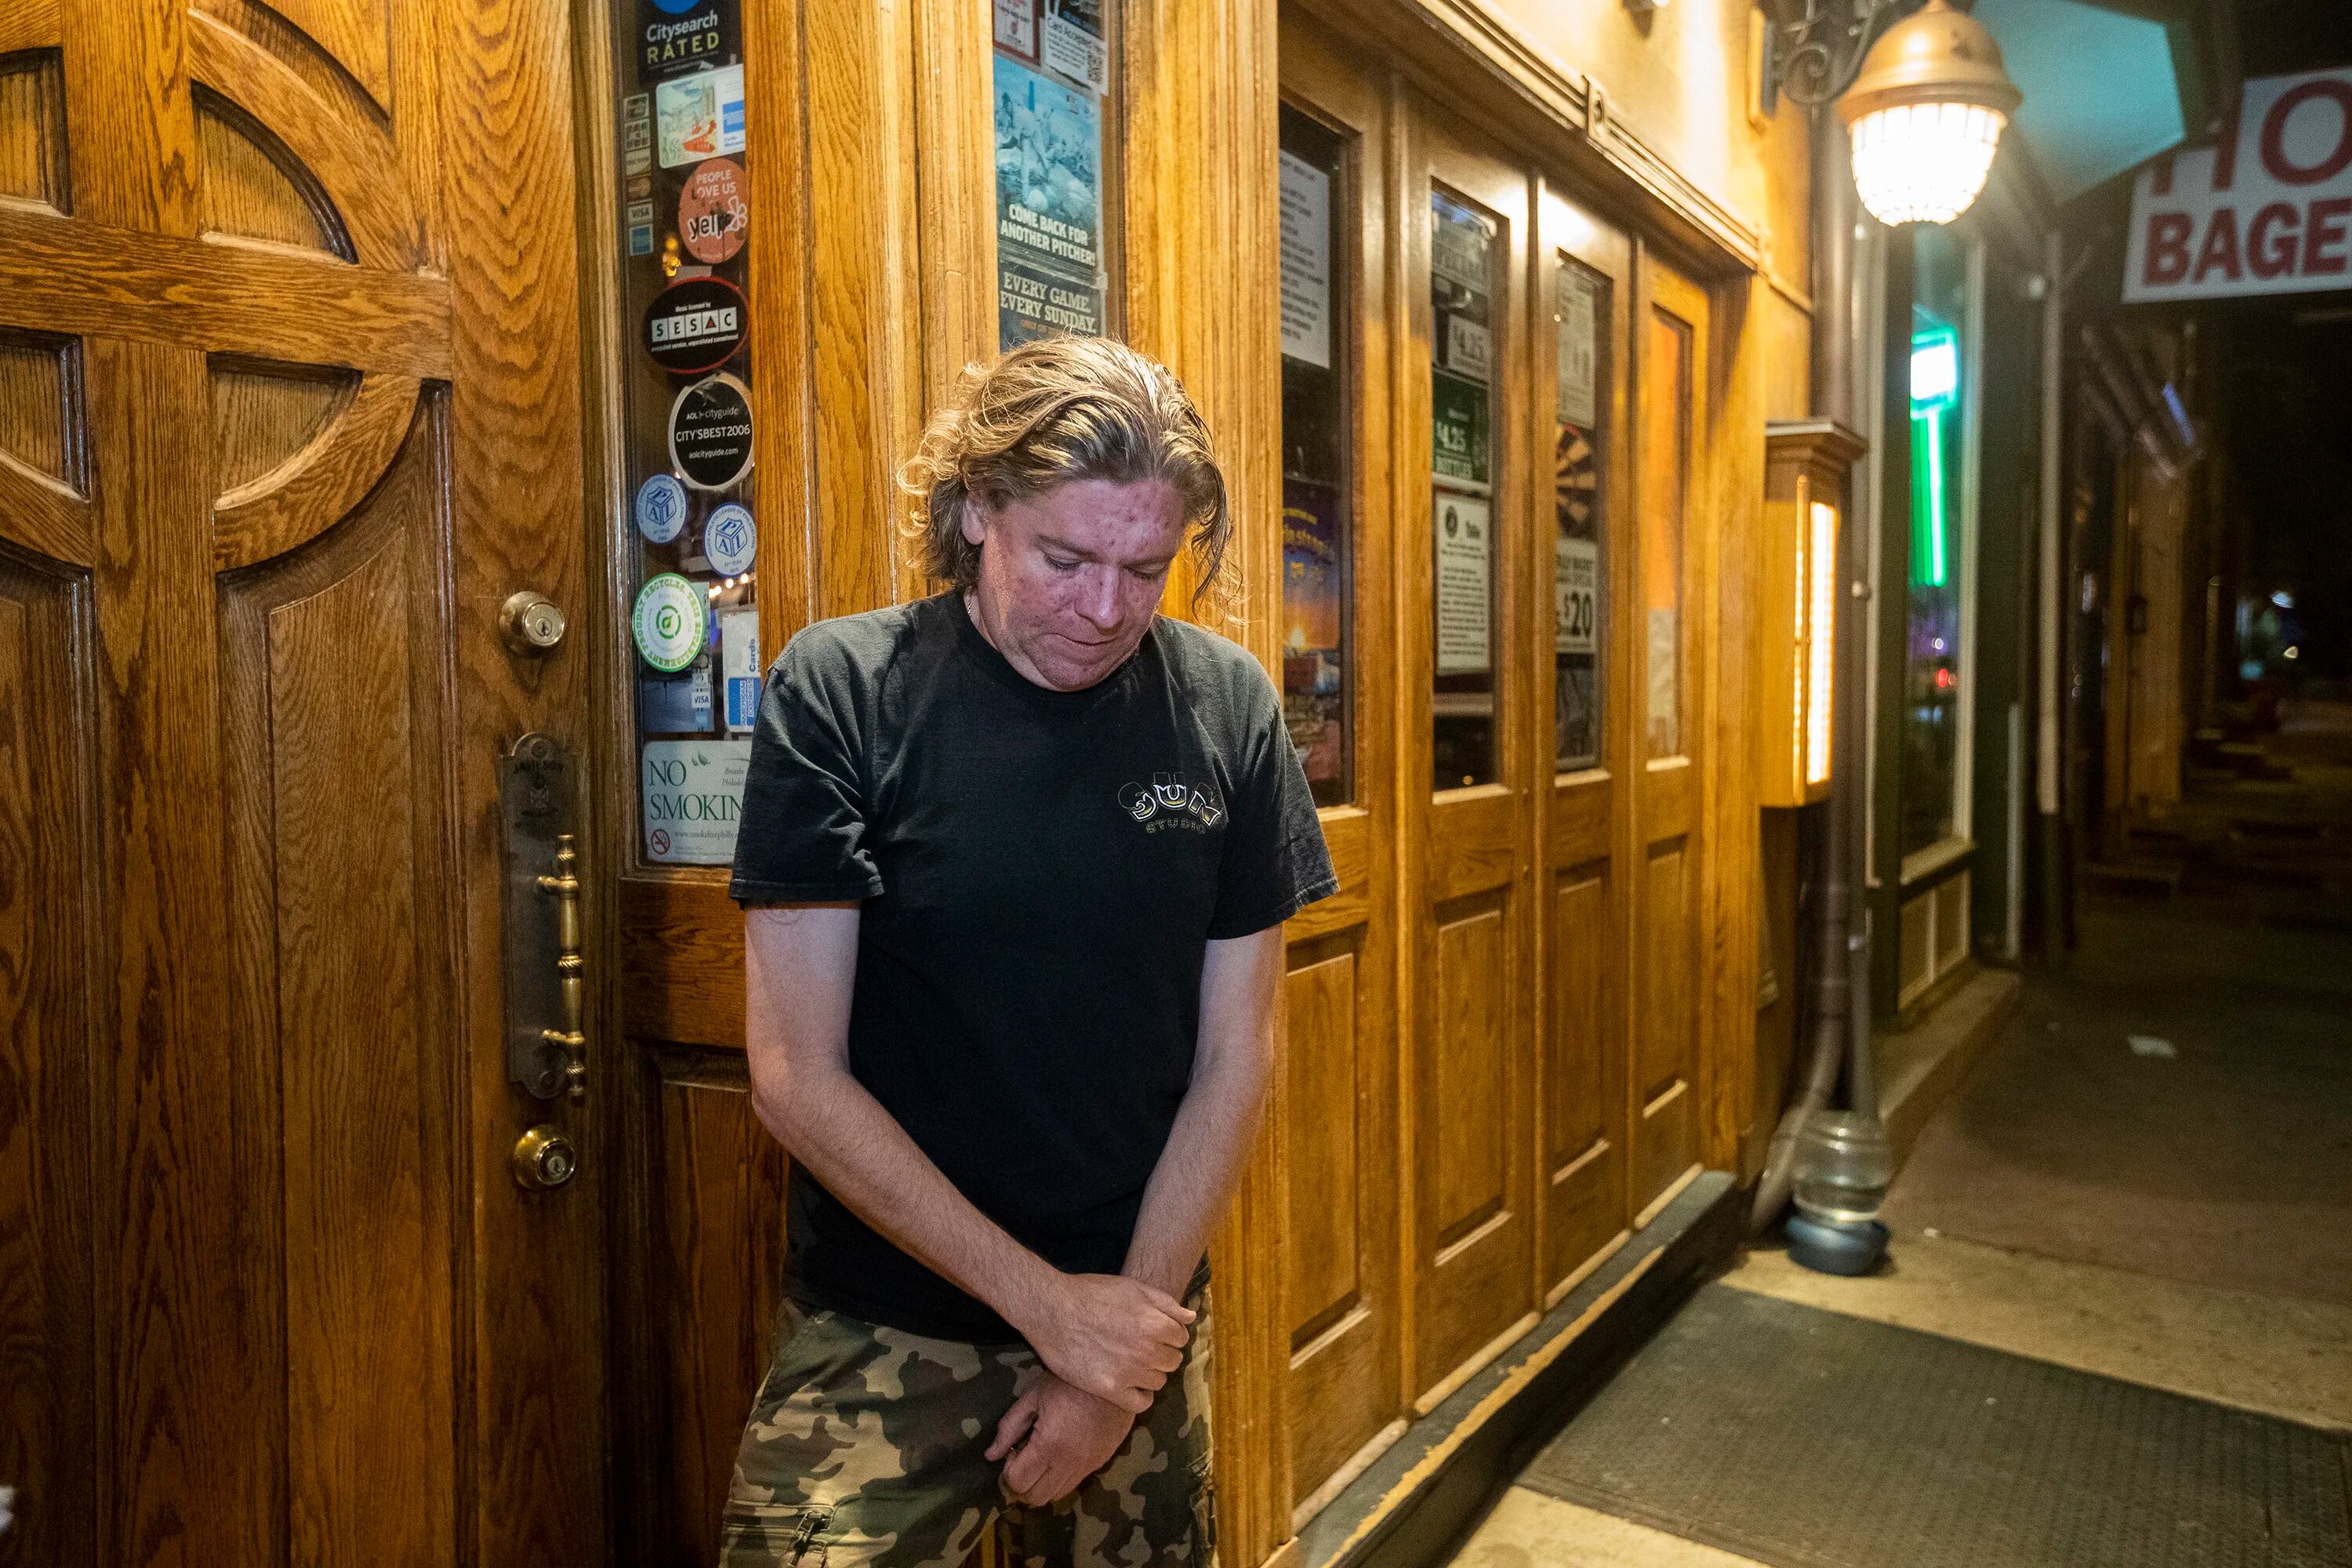 Eric Walsh, a bartender at O'Neals Irish Pub on Third Street, describes the mass shooting that left three dead and 11 wounded on South Street June 4, 2022.